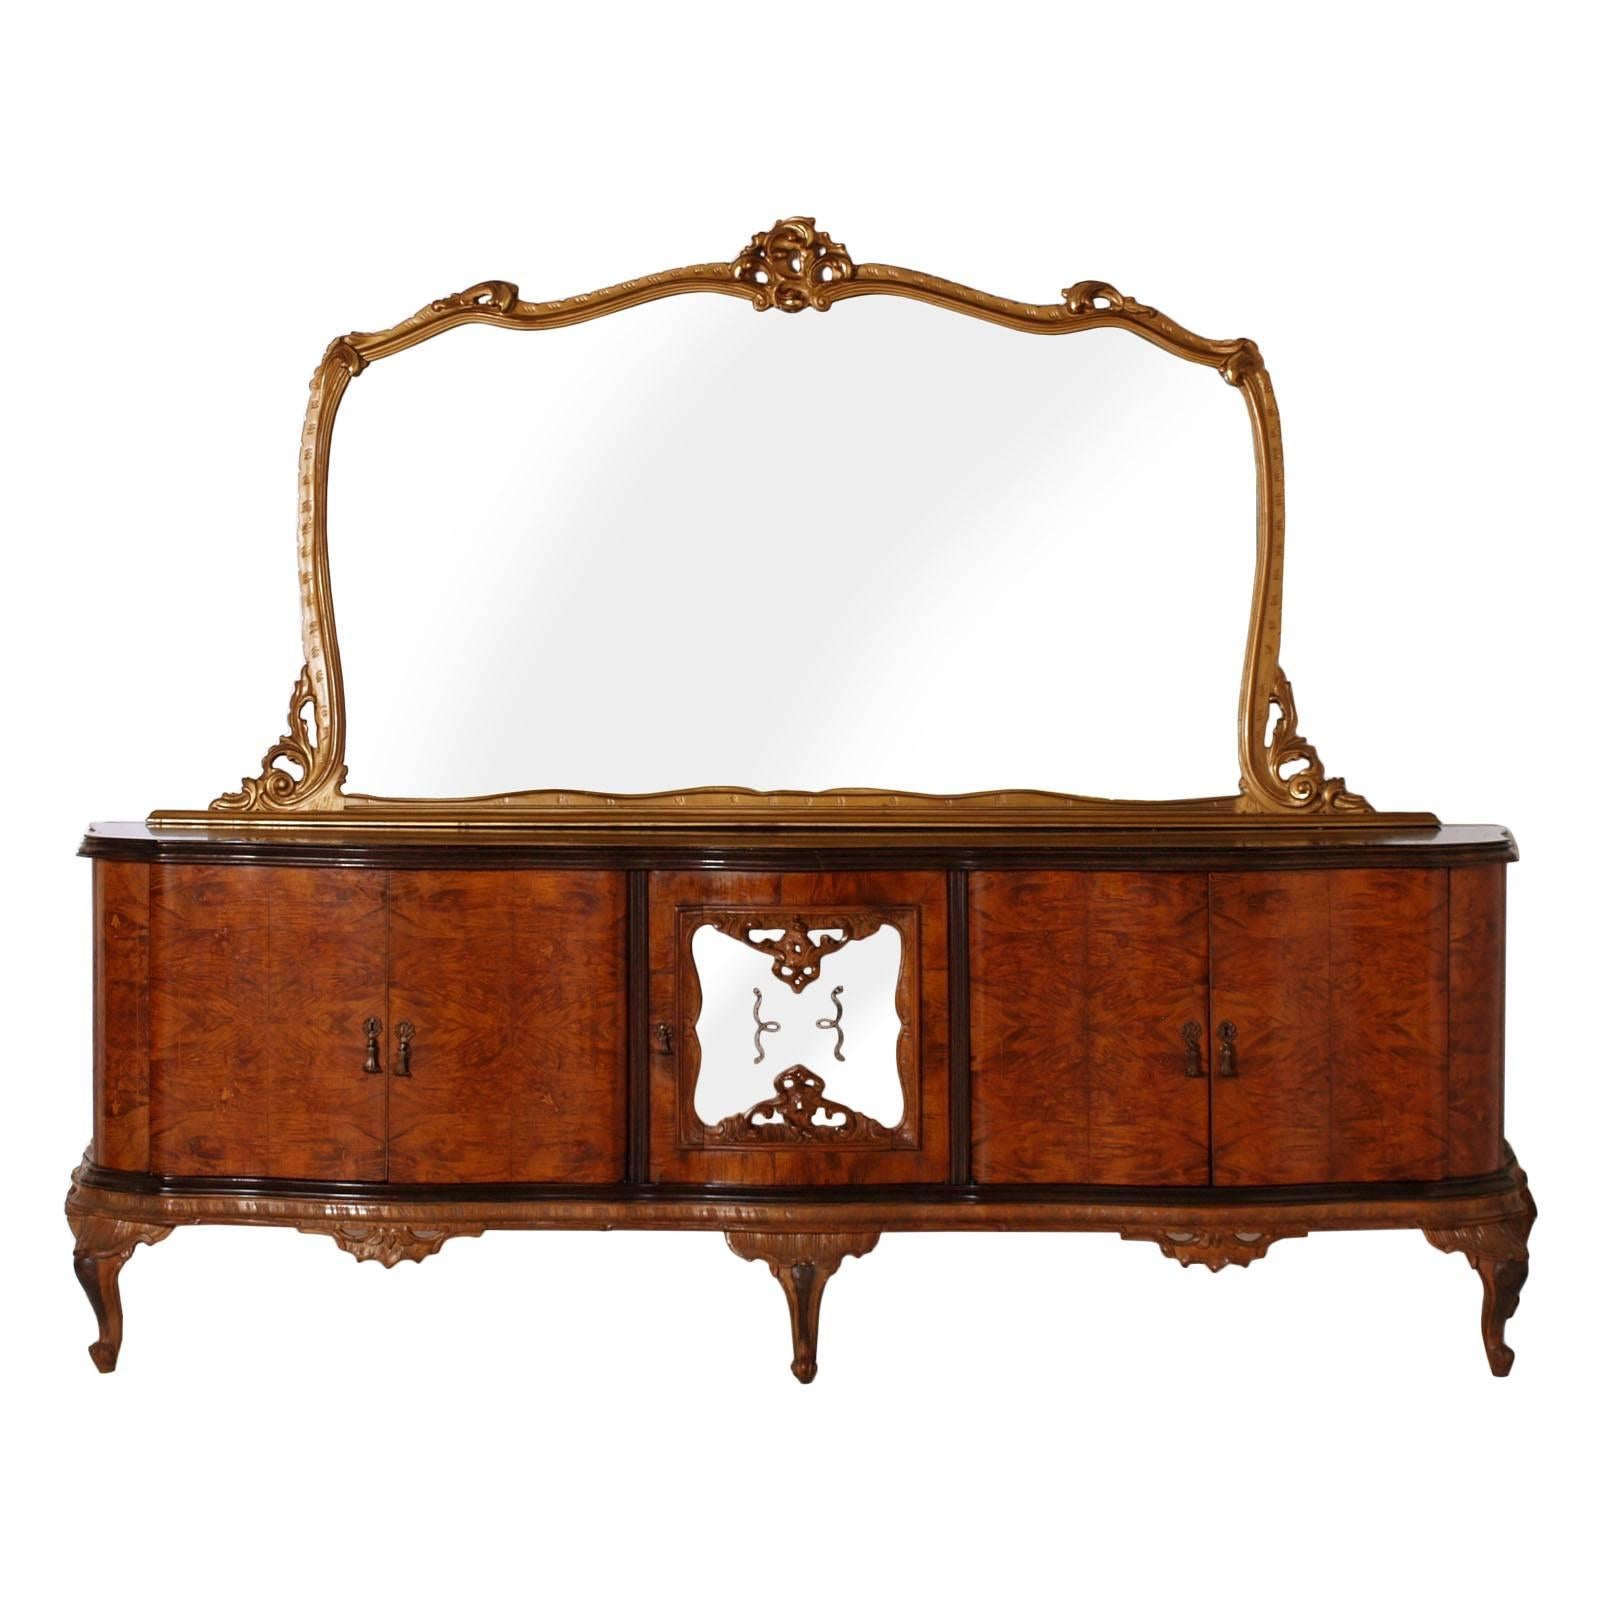 Large Venetian Baroque Chippendale Credenza with Dry Bar and Golden Leaf Mirror